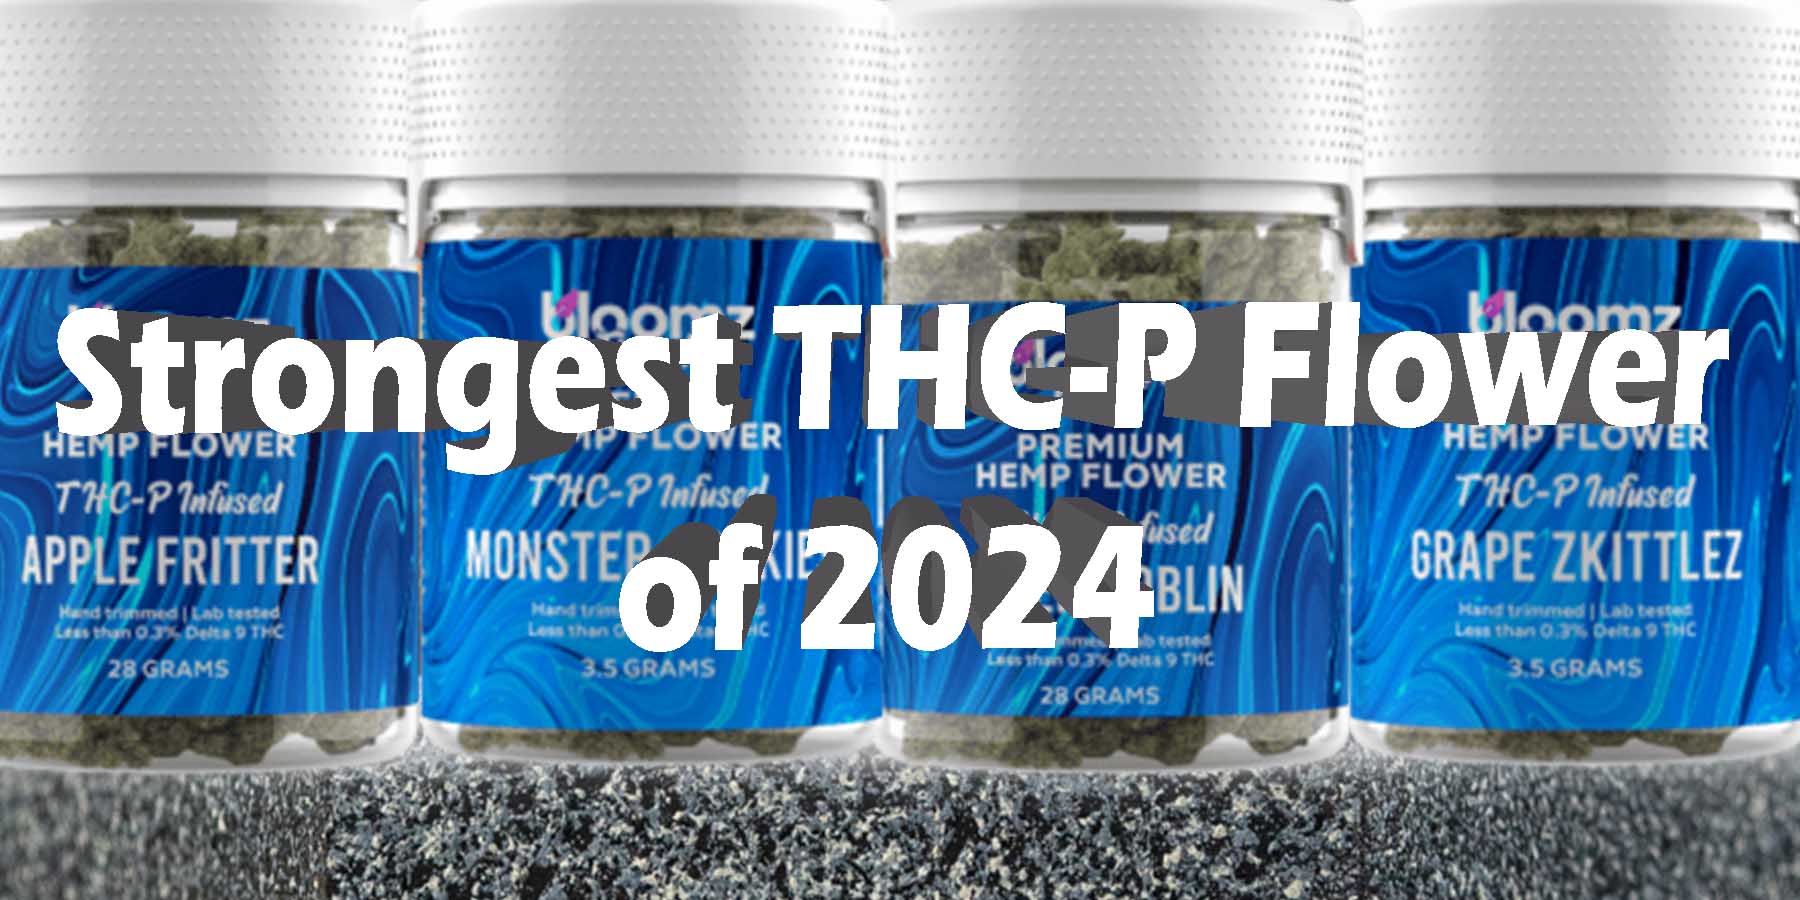 Strongest THC-P Flower of 2024 WhereToGet HowToGetNearMe BestPlace LowestPrice Coupon Discount For Smoking Best High Smoke Shop Online Near Me StrongestBrand BestBrand